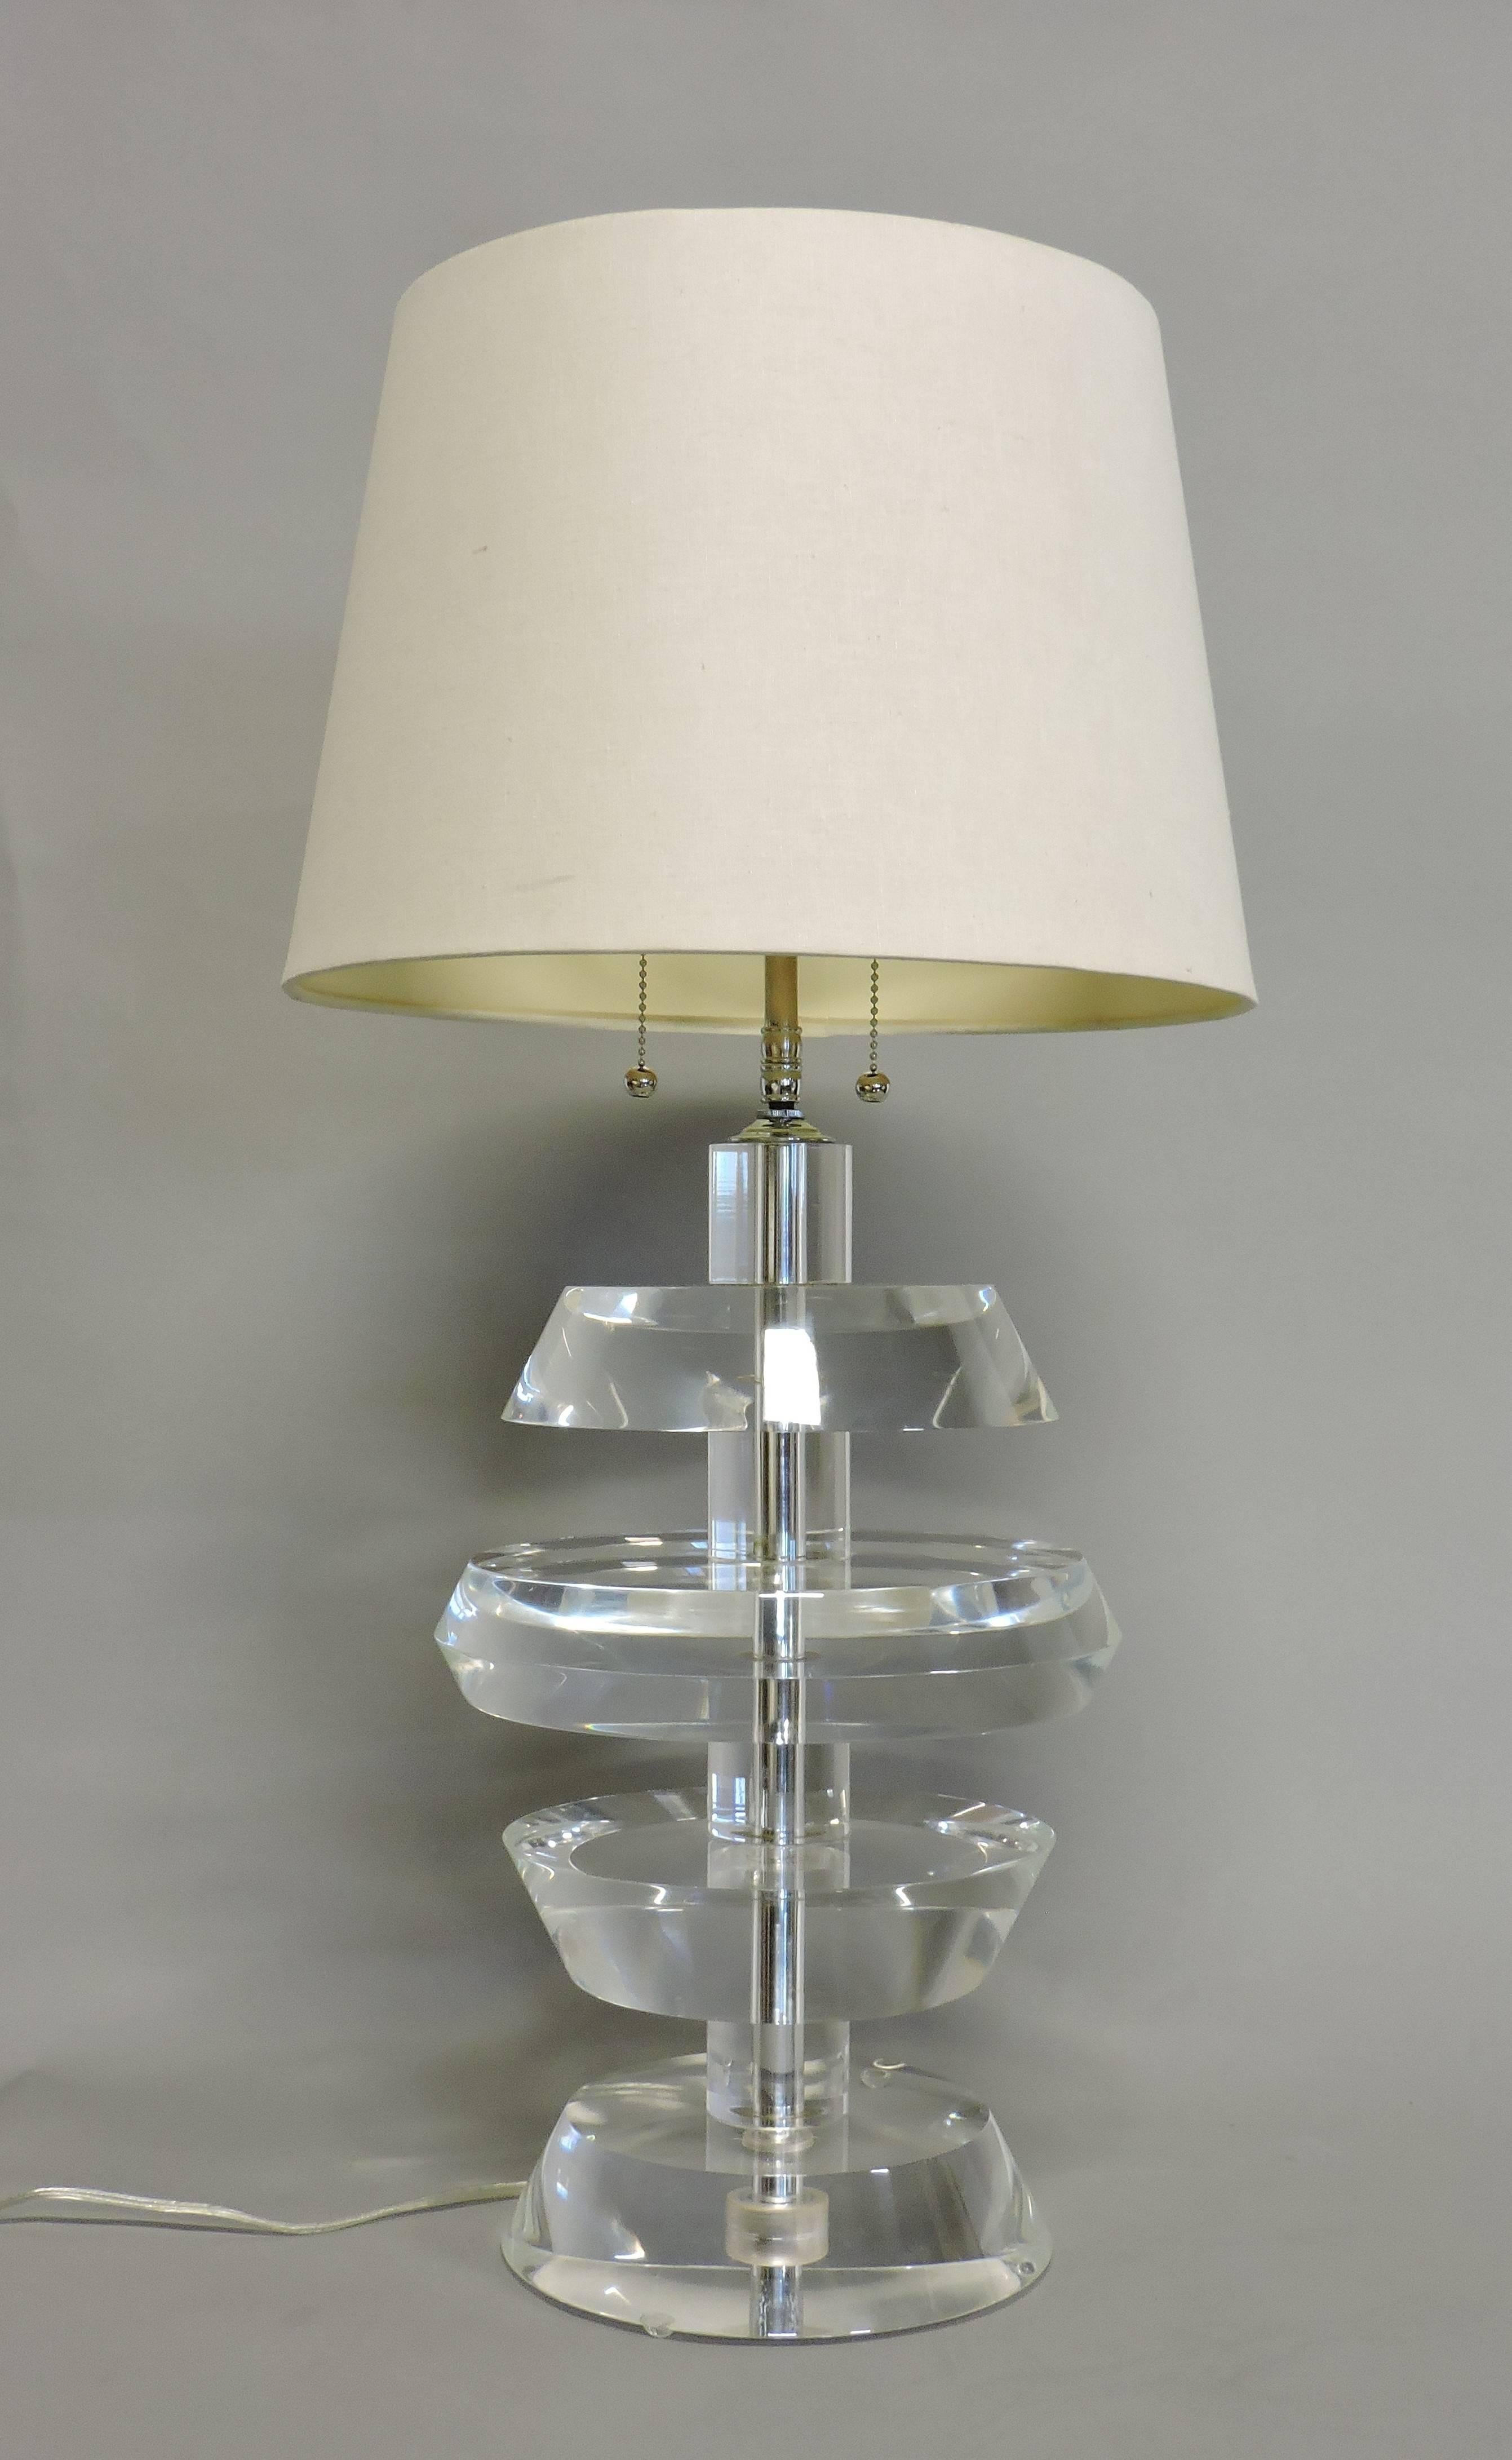 Karl Springer Style Mid-Century Modern Stacked Lucite and Chrome Table Lamp For Sale 1